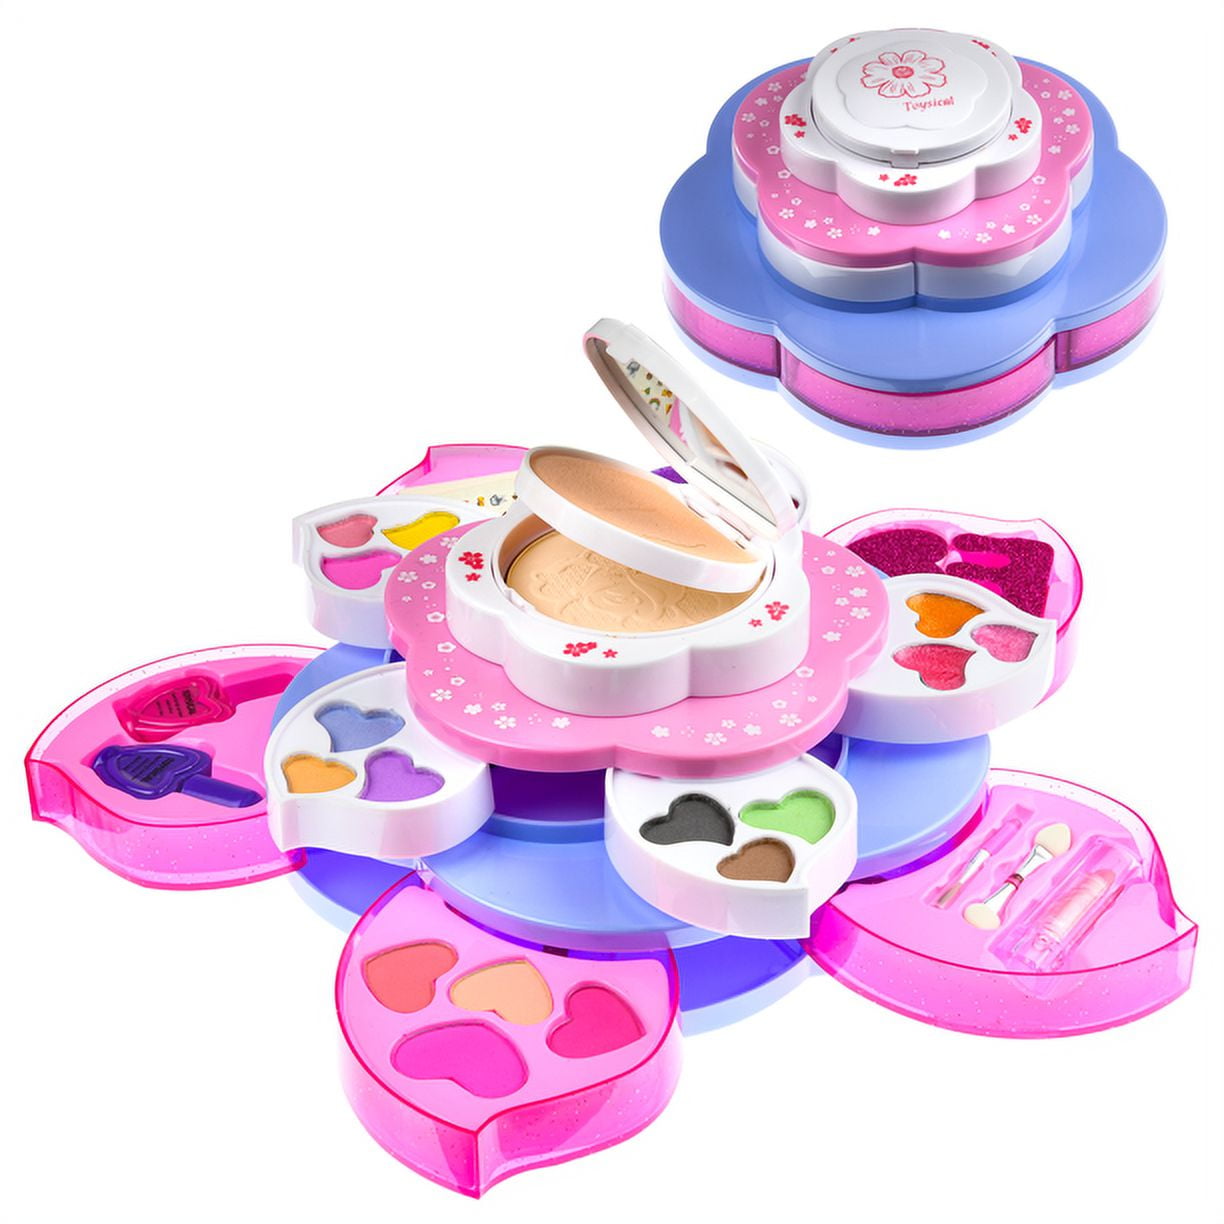 21pcs Kids Toys Makeup Set Girls Dress Up Clothes for Little Girls 9 Year Old Girl Gifts Gifts for 8 Year Old Girls Toys for 6 Year Old Girls Gifts